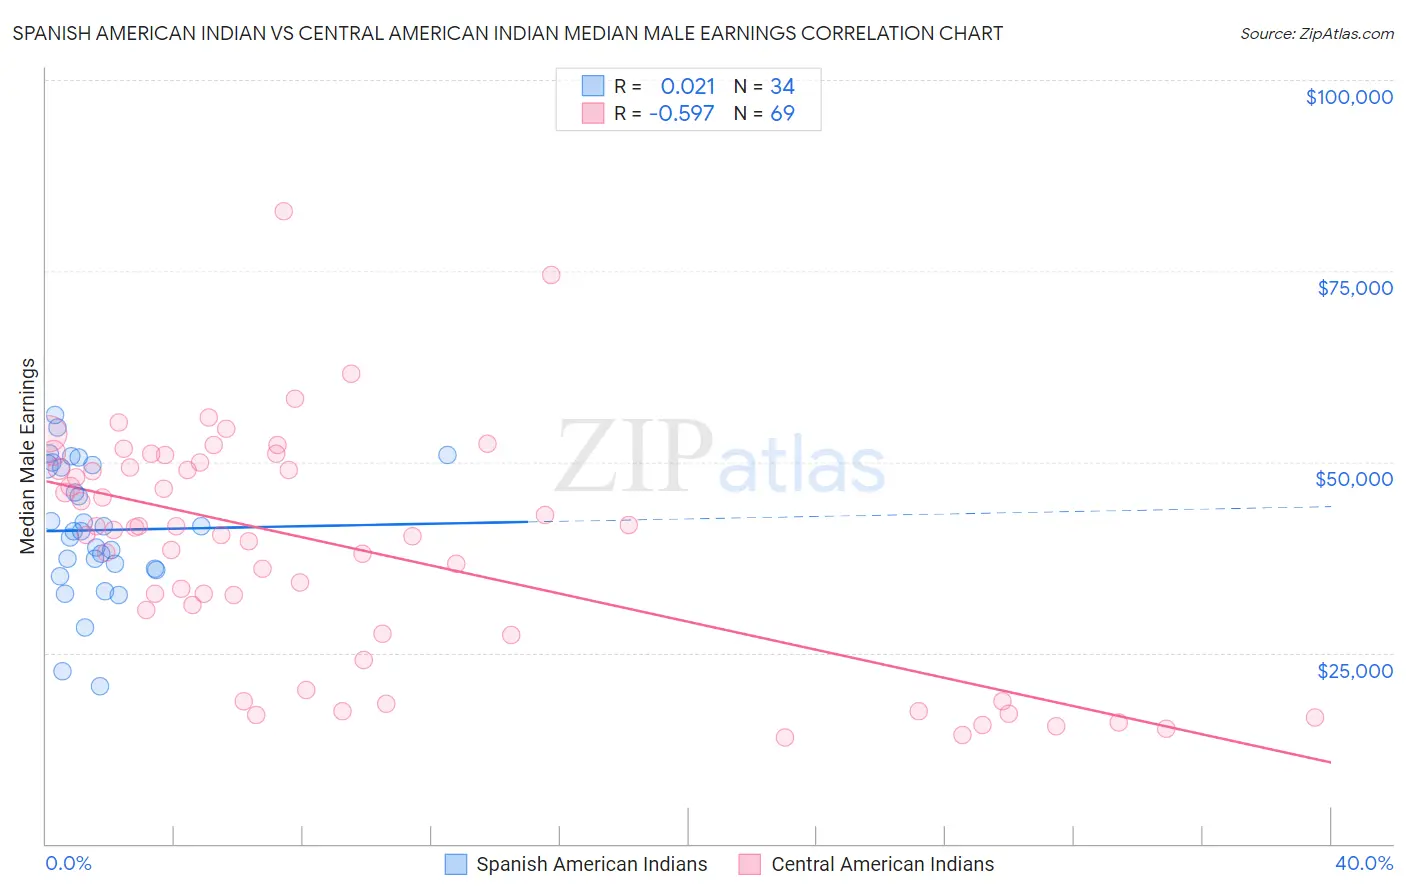 Spanish American Indian vs Central American Indian Median Male Earnings